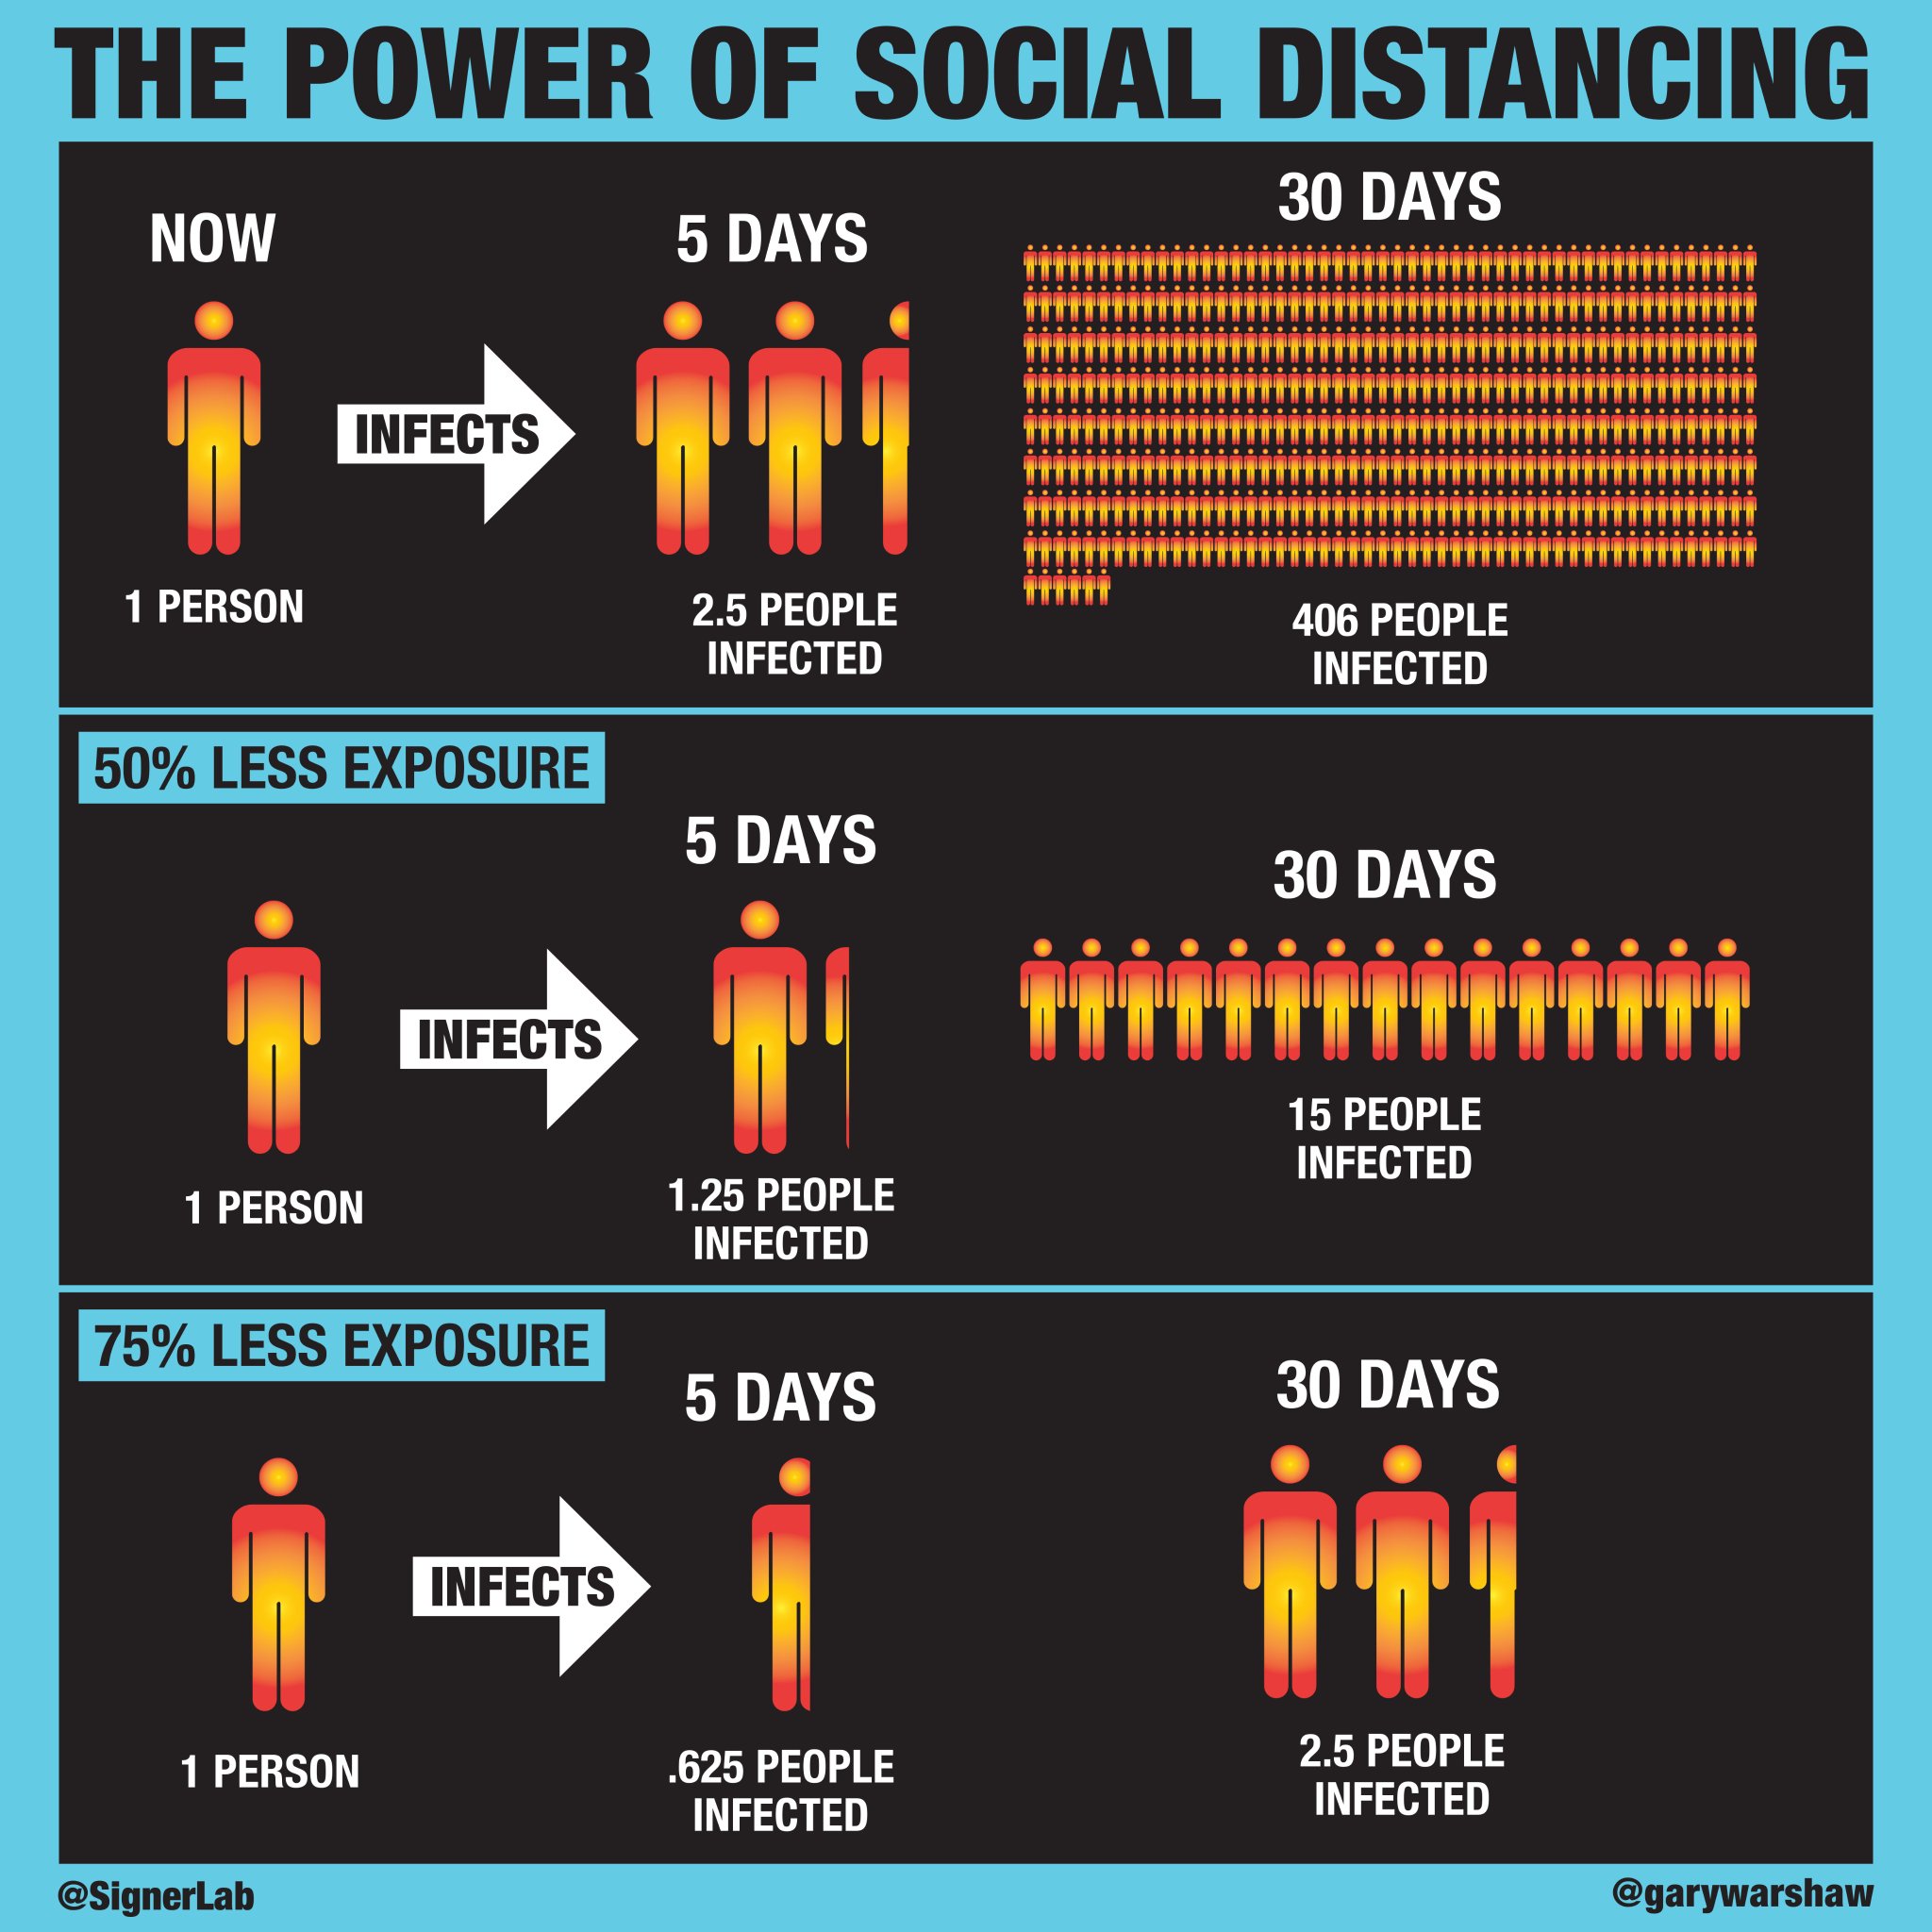 This image, created by the Signer Lab at the University of California San Diego, illustrates the power of social distancing.